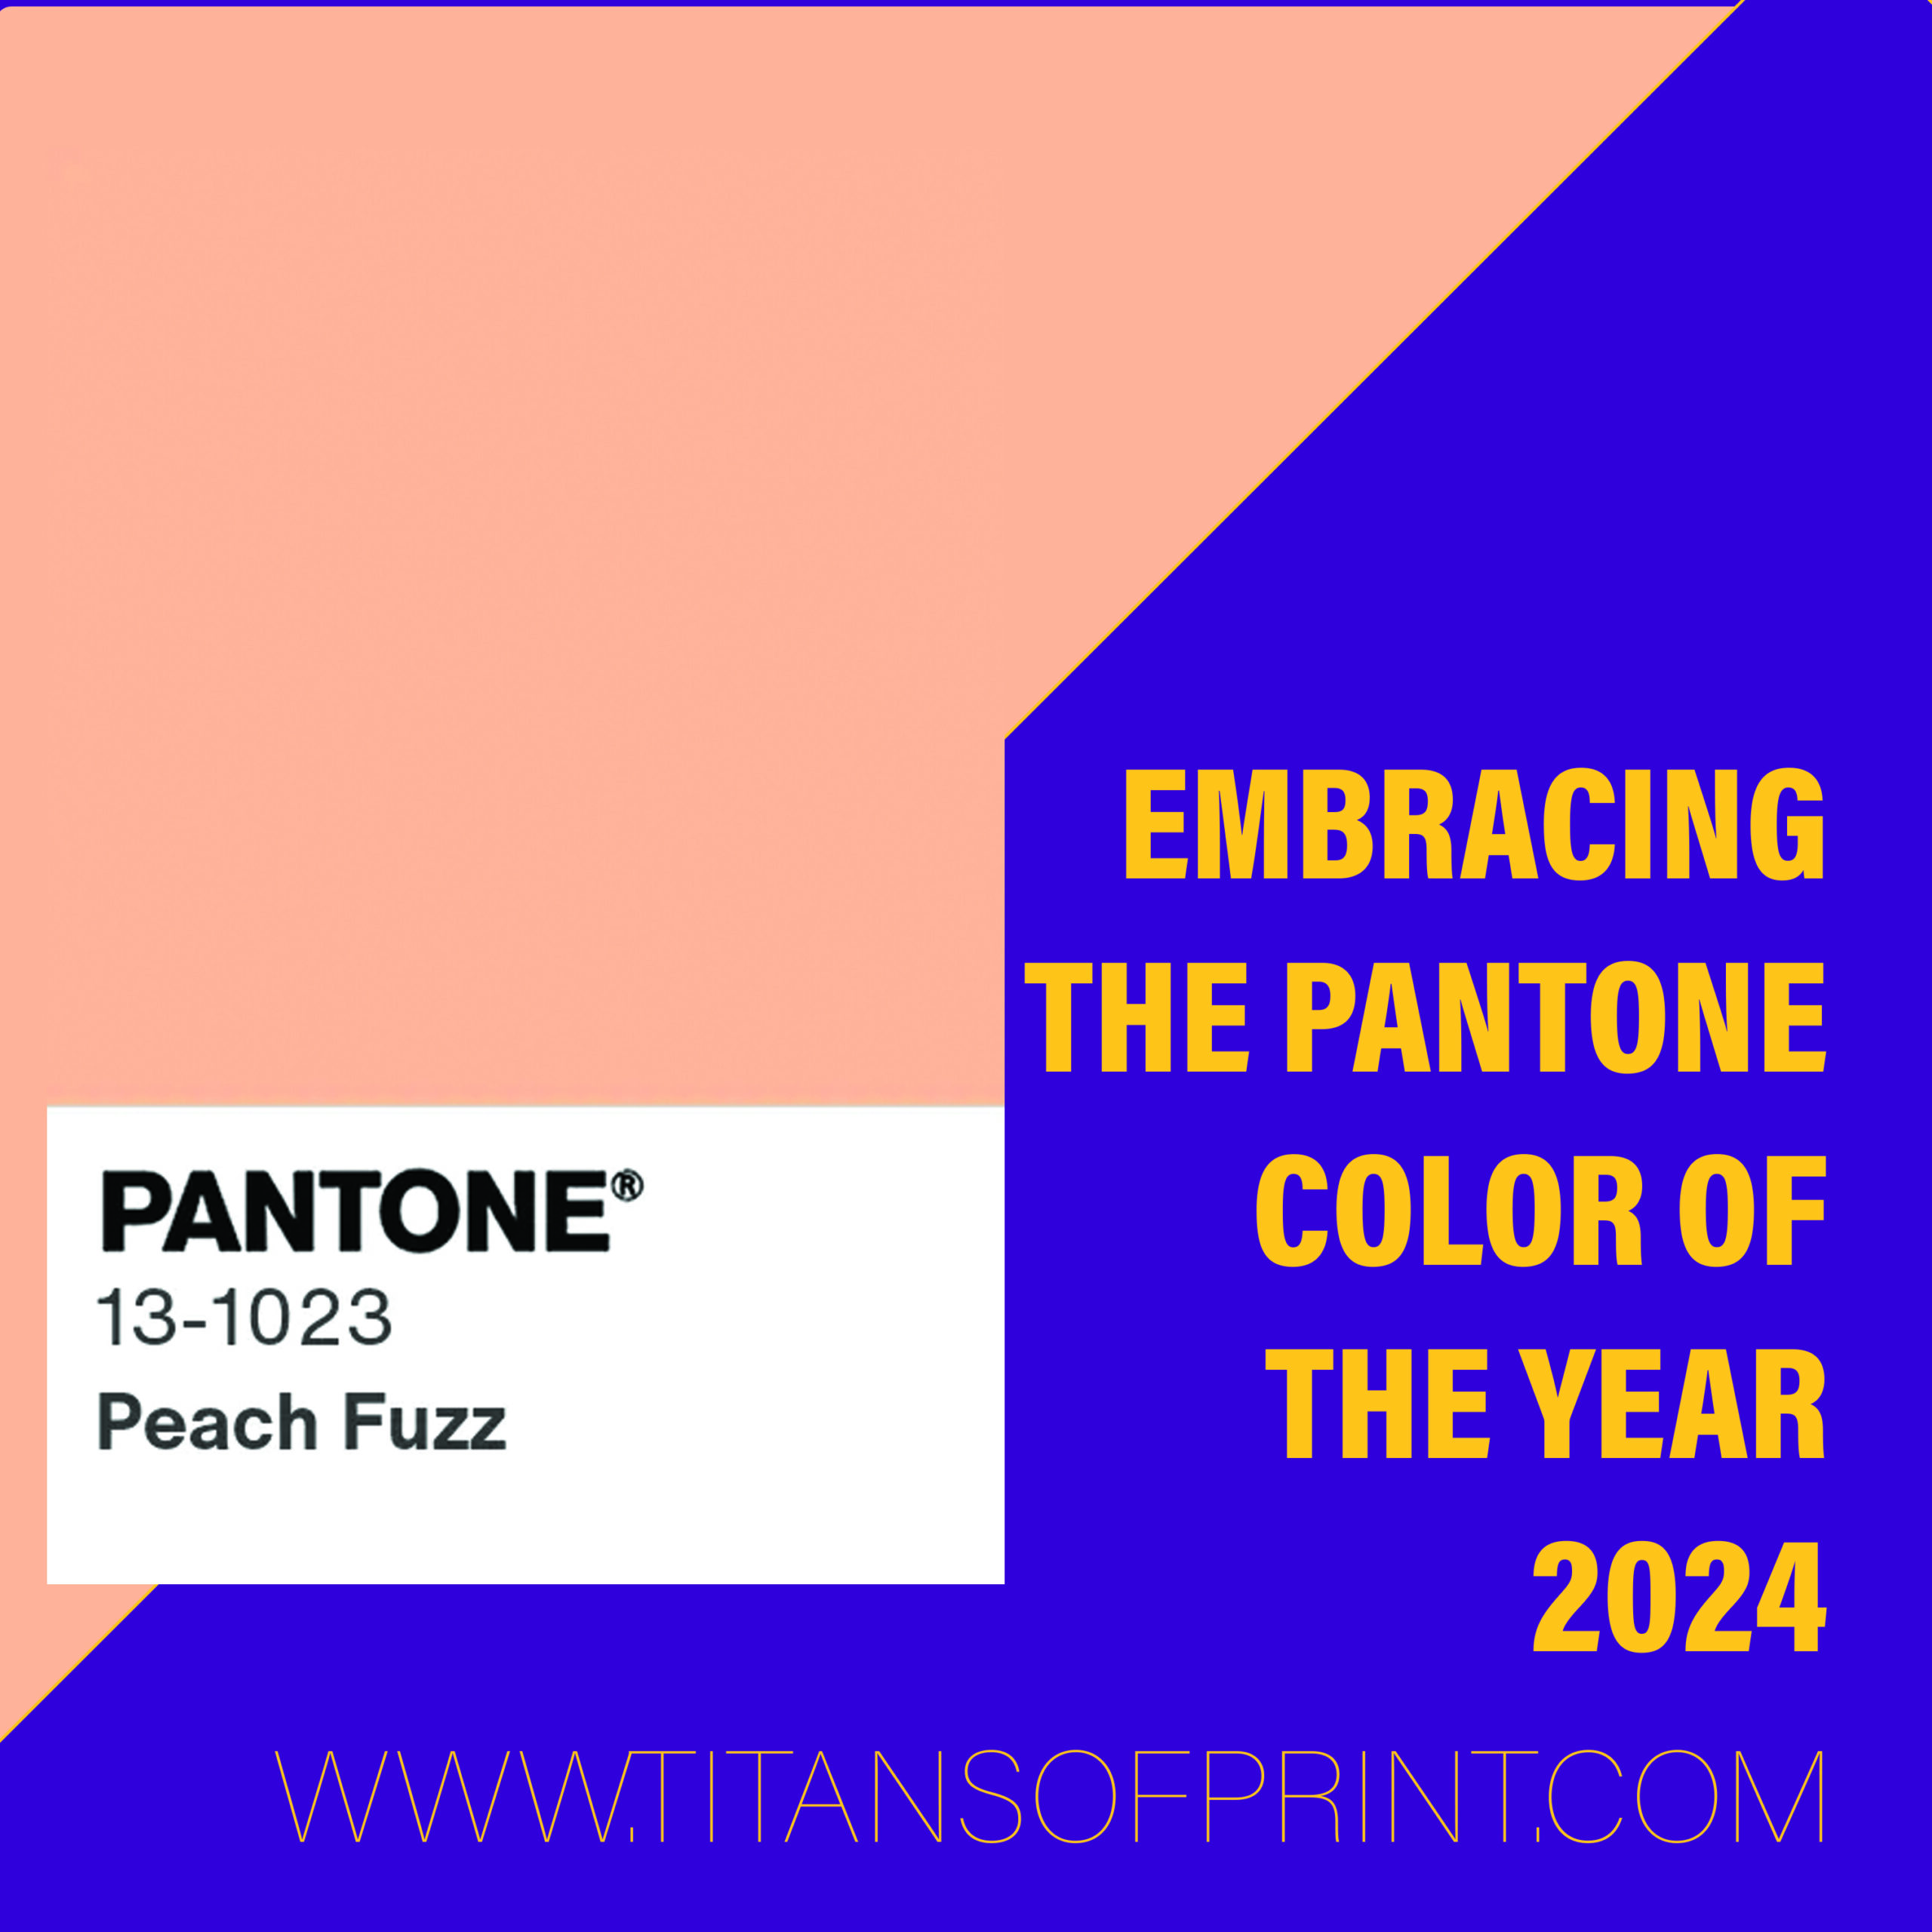 Embracing the Pantone Color of the Year 2024